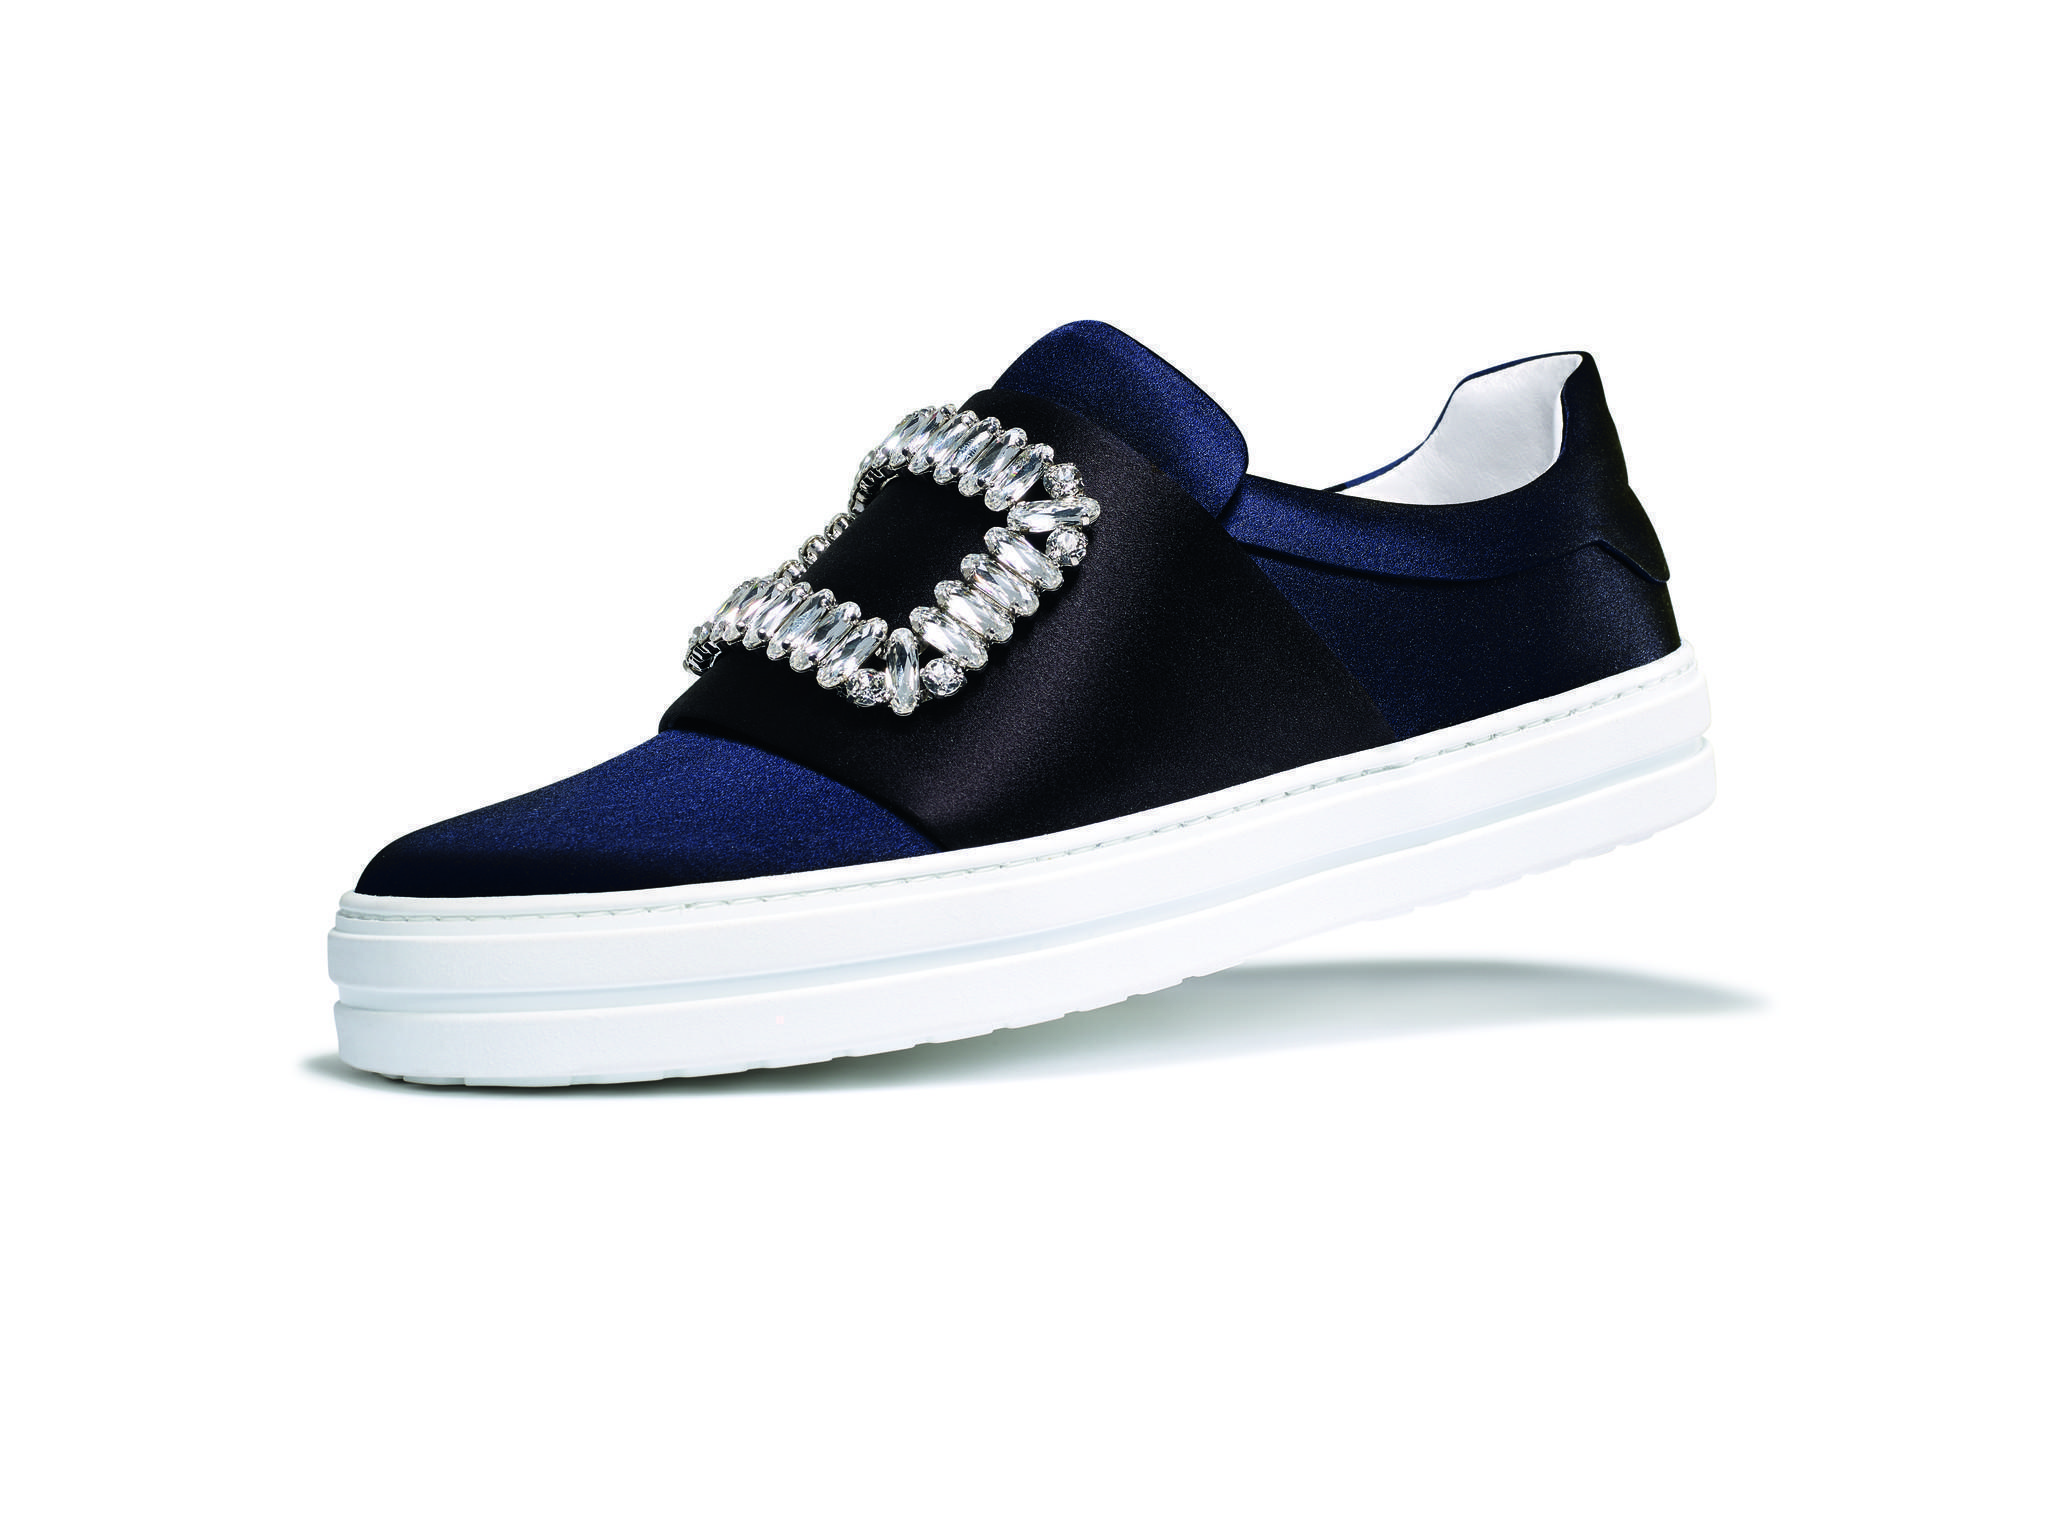 Roger Vivier steps into the luxury sneaker game - LA Times